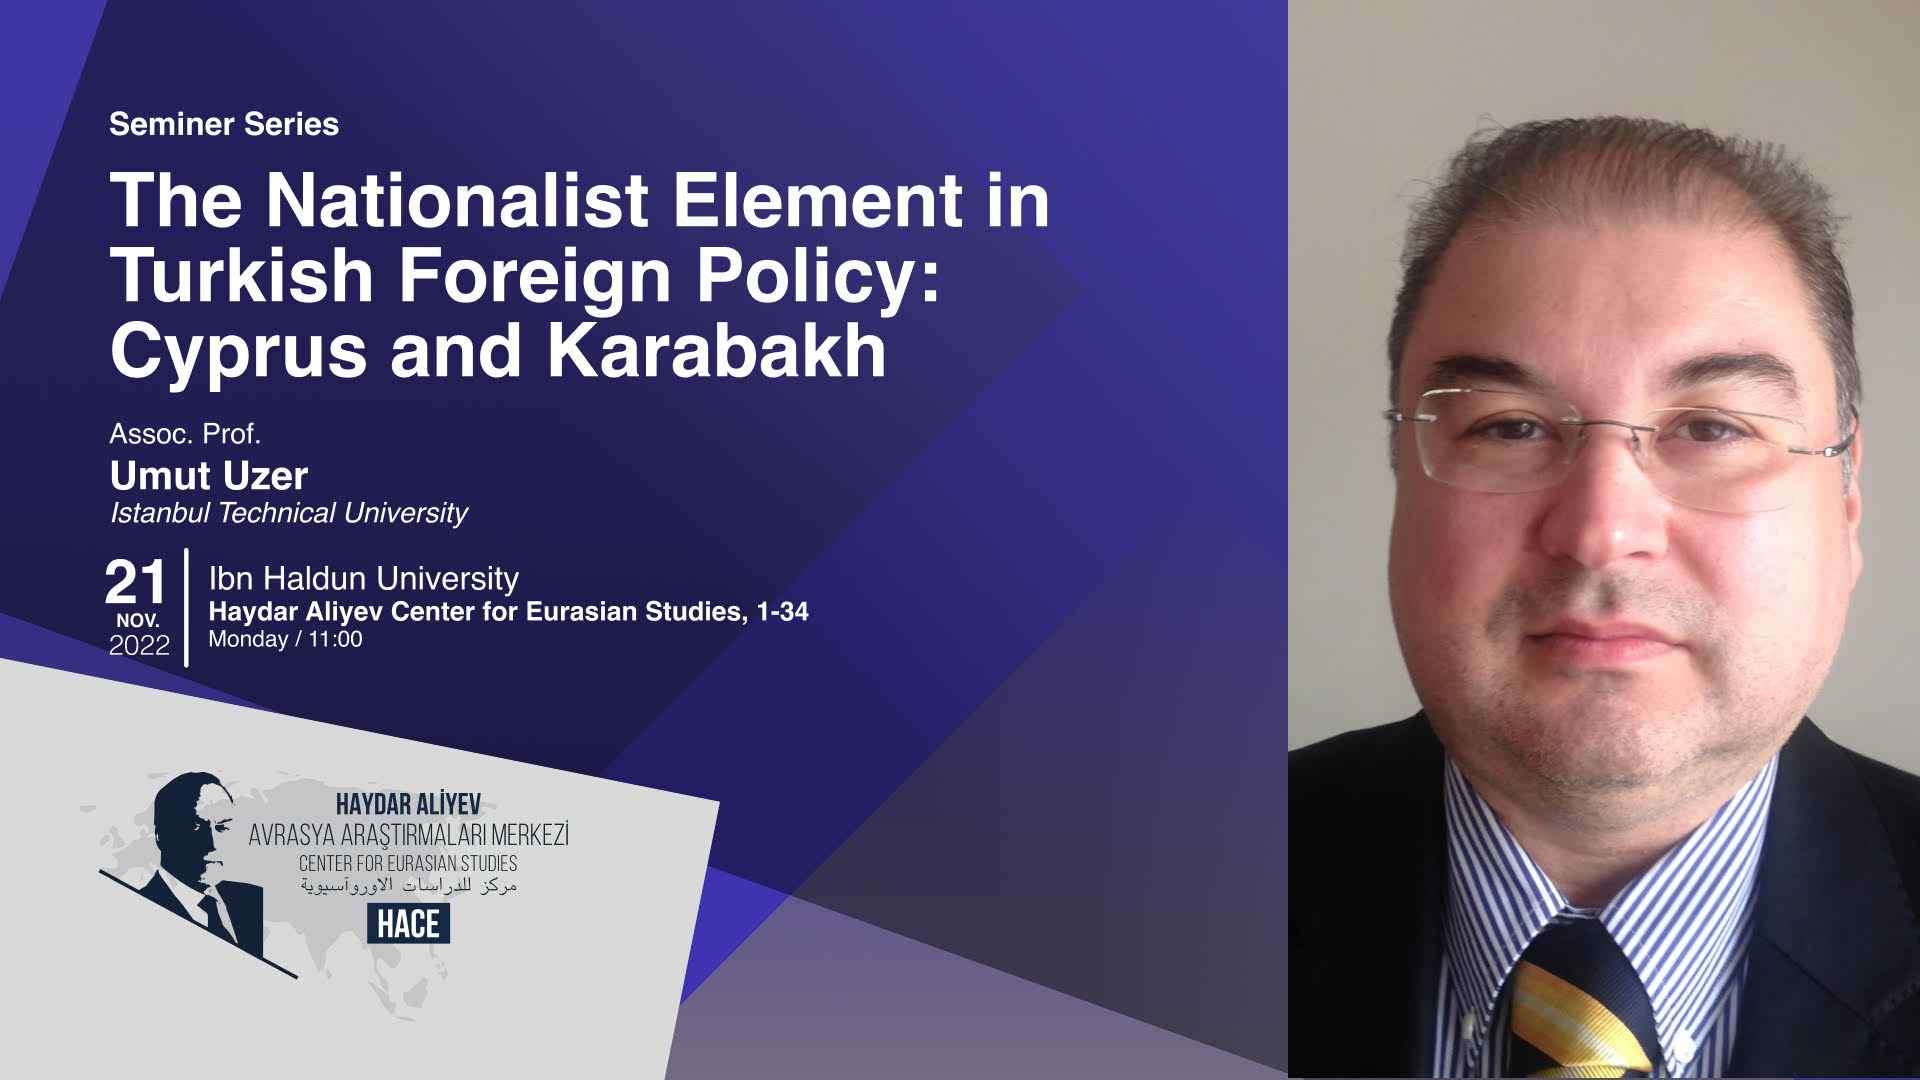 The Nationalist Element in Turkish Foreign Policy: Cyprus and Karabakh